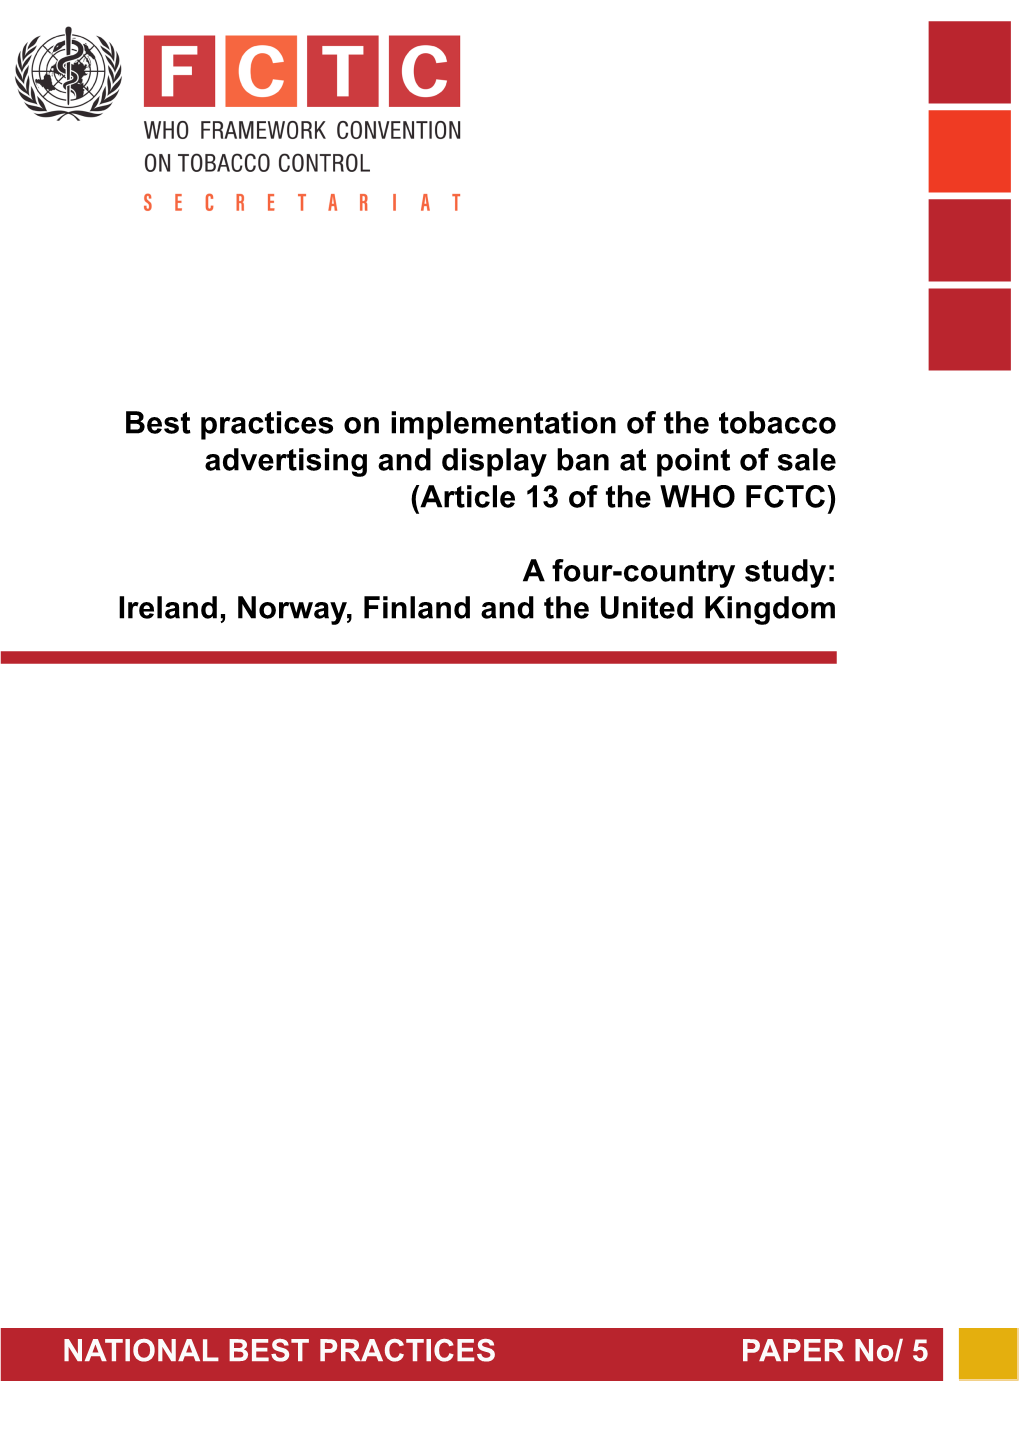 5 Best Practices on Implementation of the Tobacco Advertising and Display Ban at Point of Sale (Article 13 of the WHO FCTC)